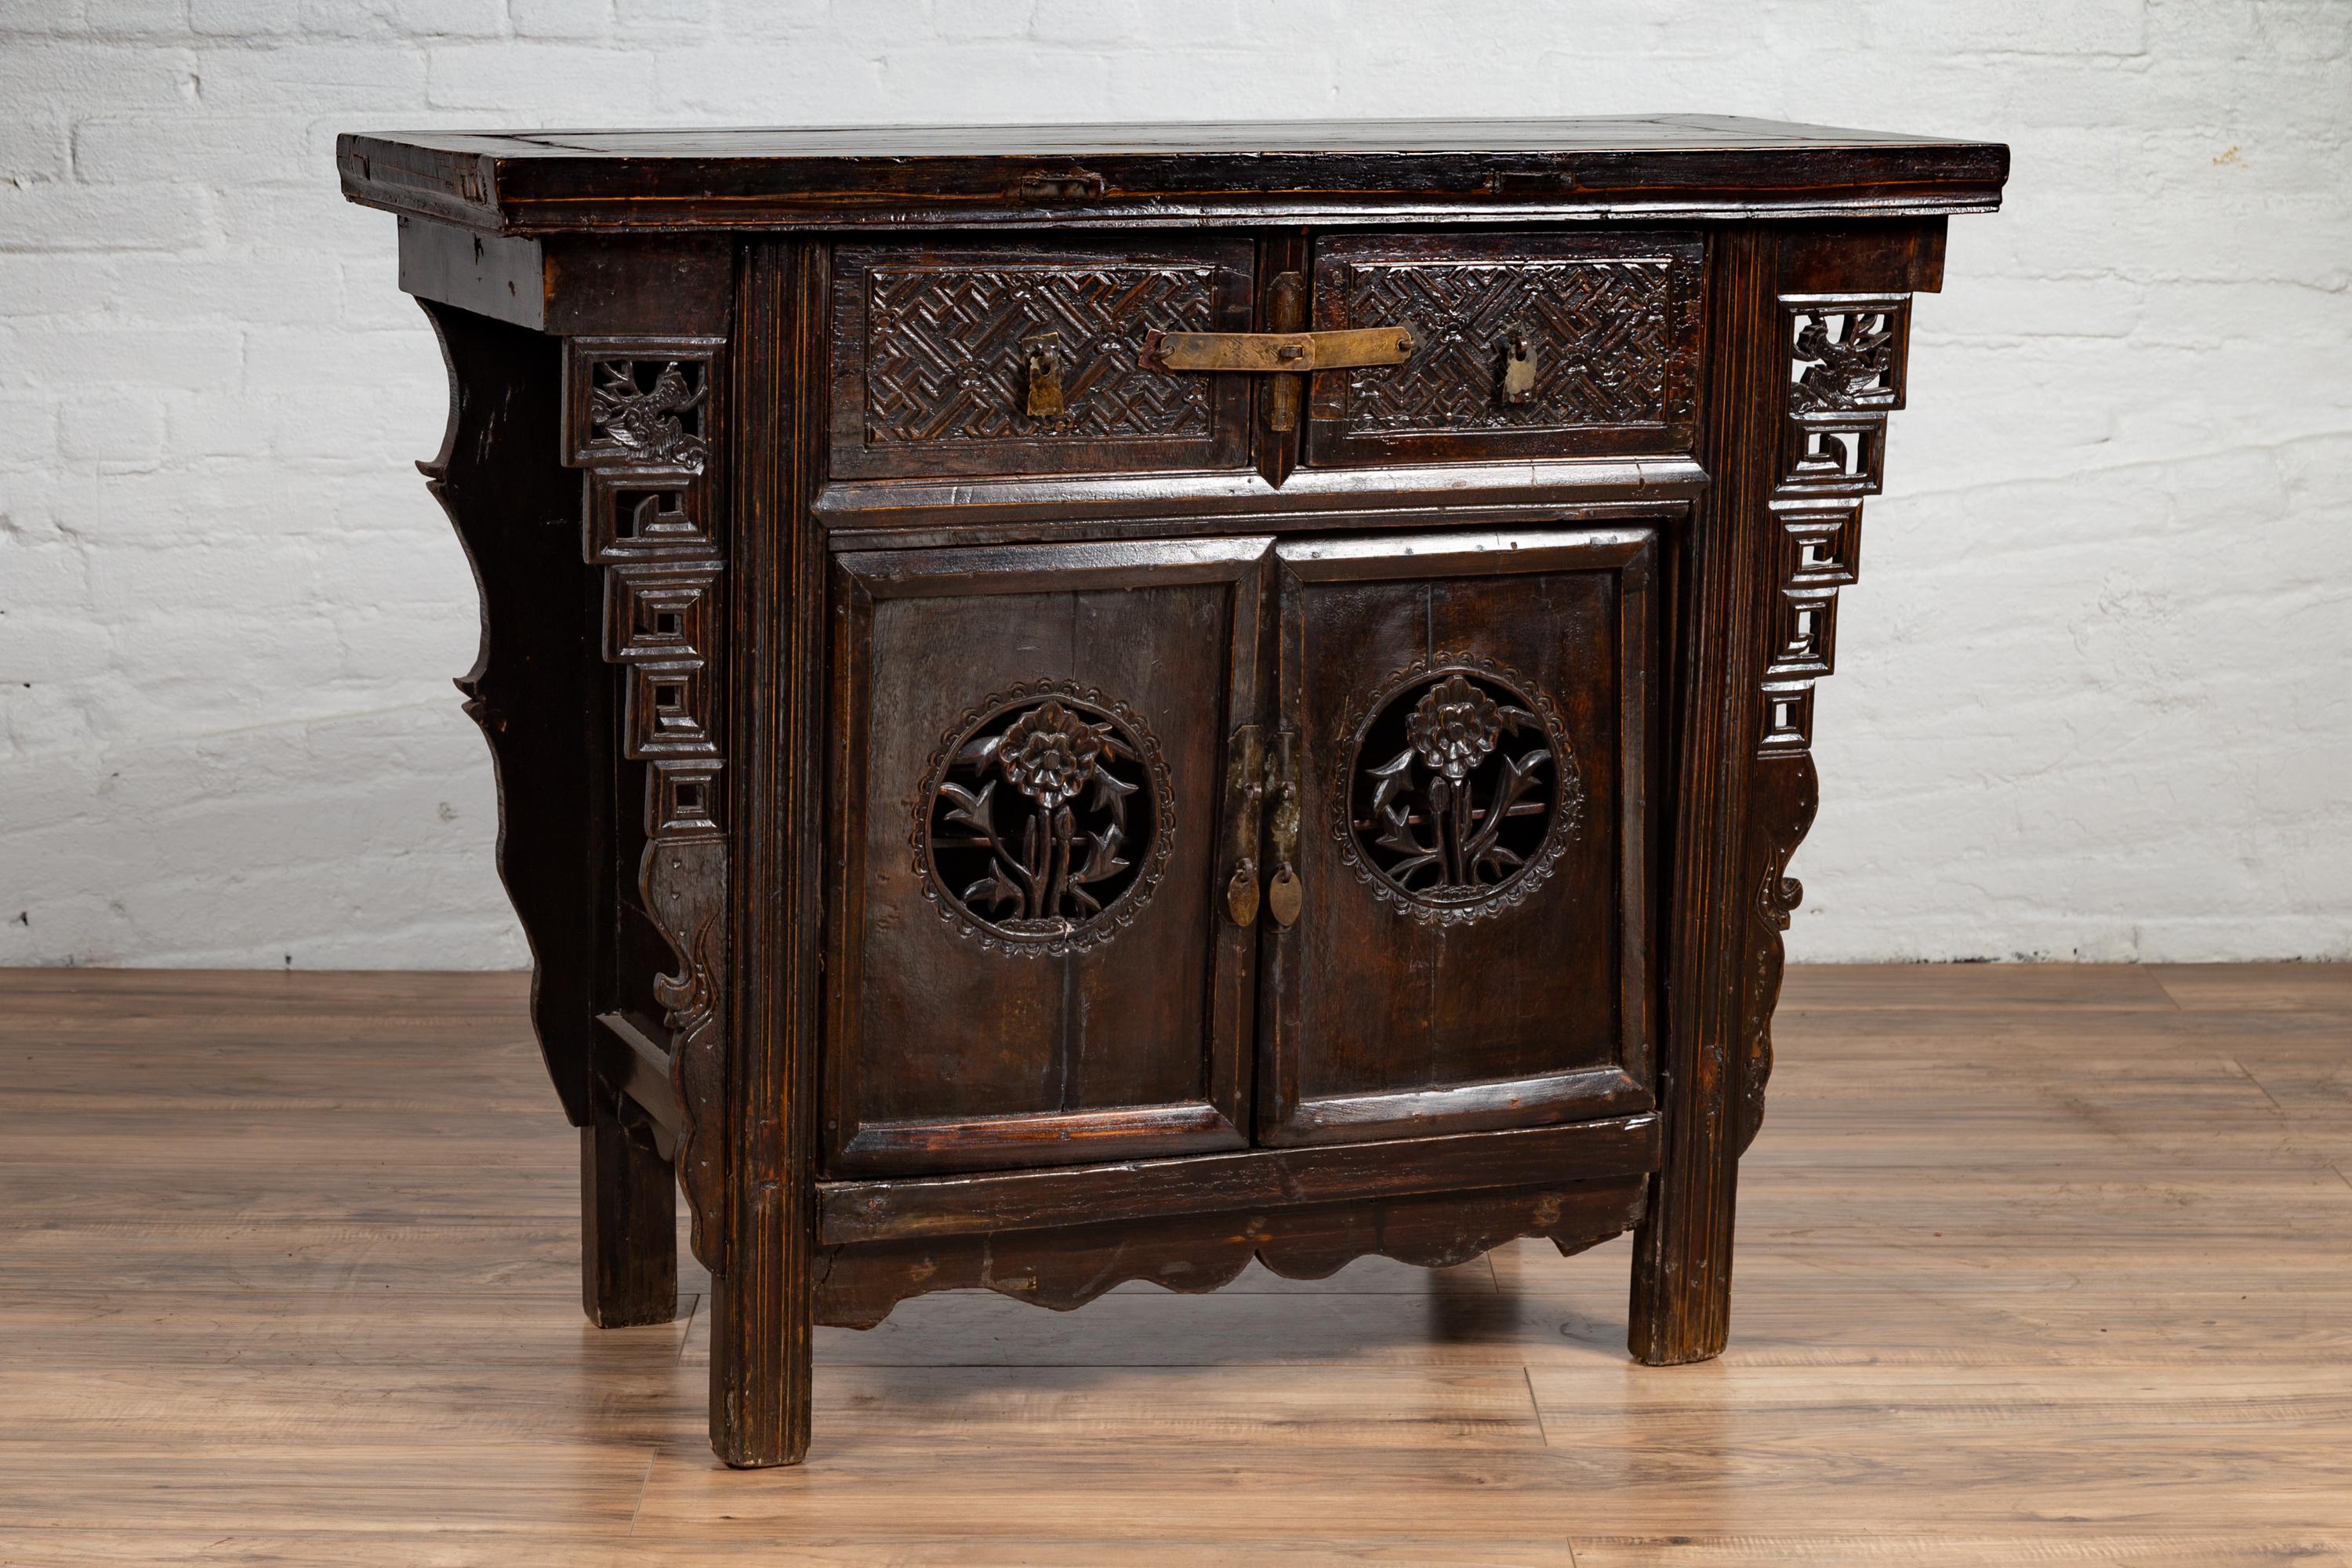 A Chinese Ming Dynasty style wooden butterfly cabinet from the 19th century, with carved spandrels, drawers, doors and dark patina. Born in China during the 19th century, this exquisite coffer called a butterfly cabinet, features a rectangular